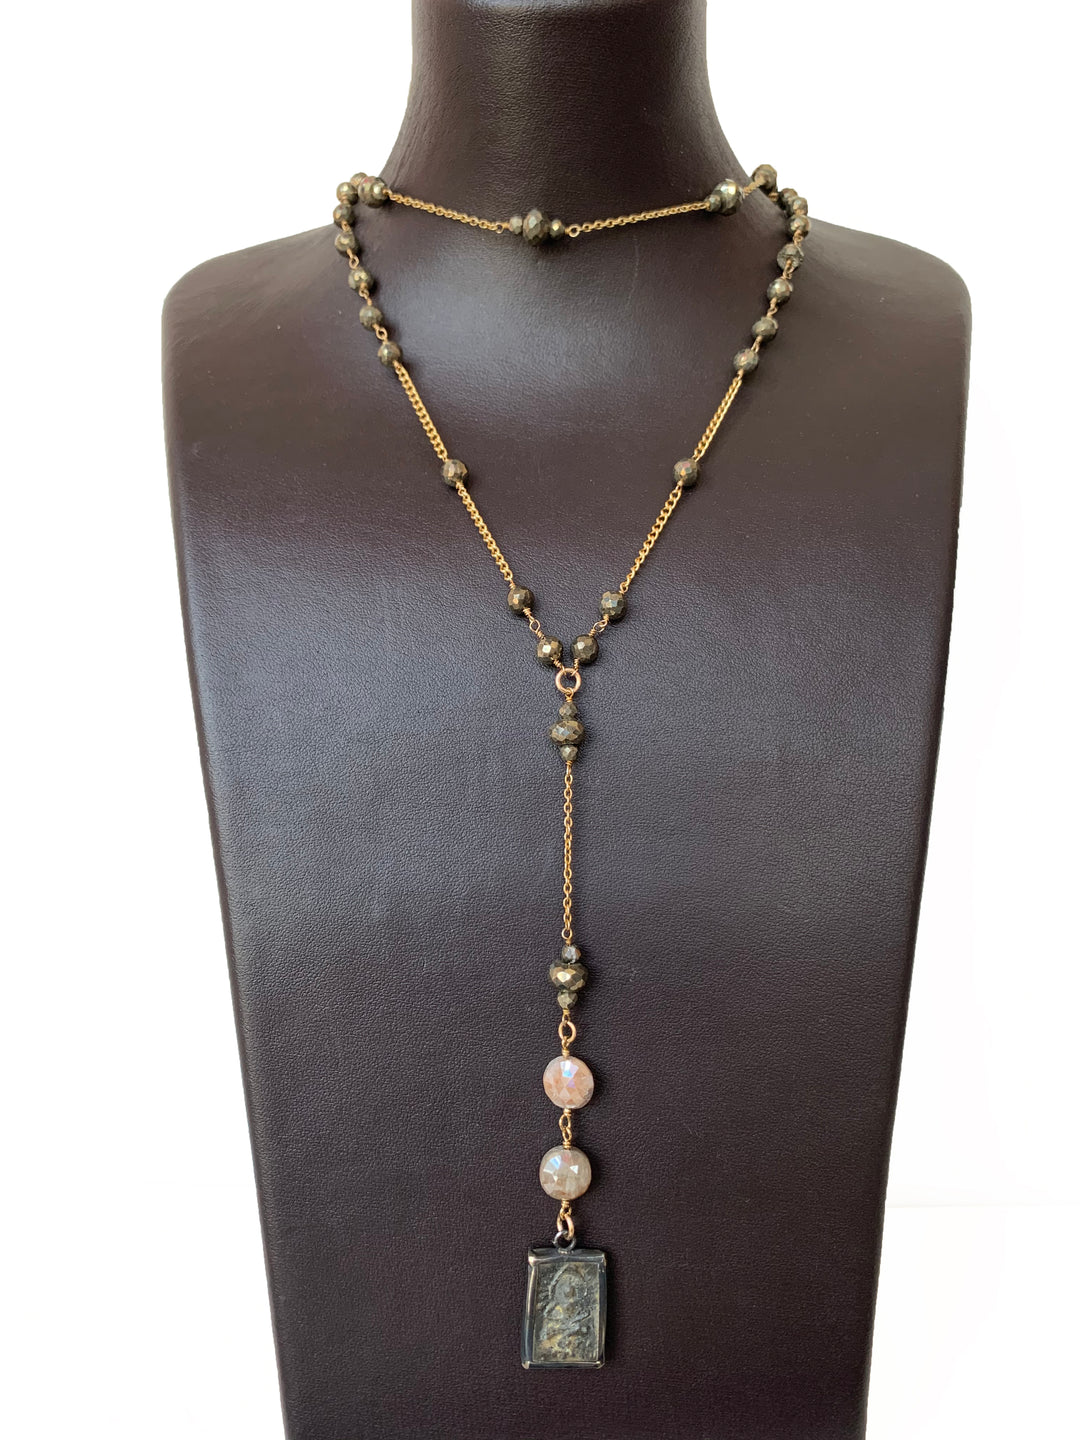 Pyrite Necklace With Buddha - Kingfisher Road - Online Boutique